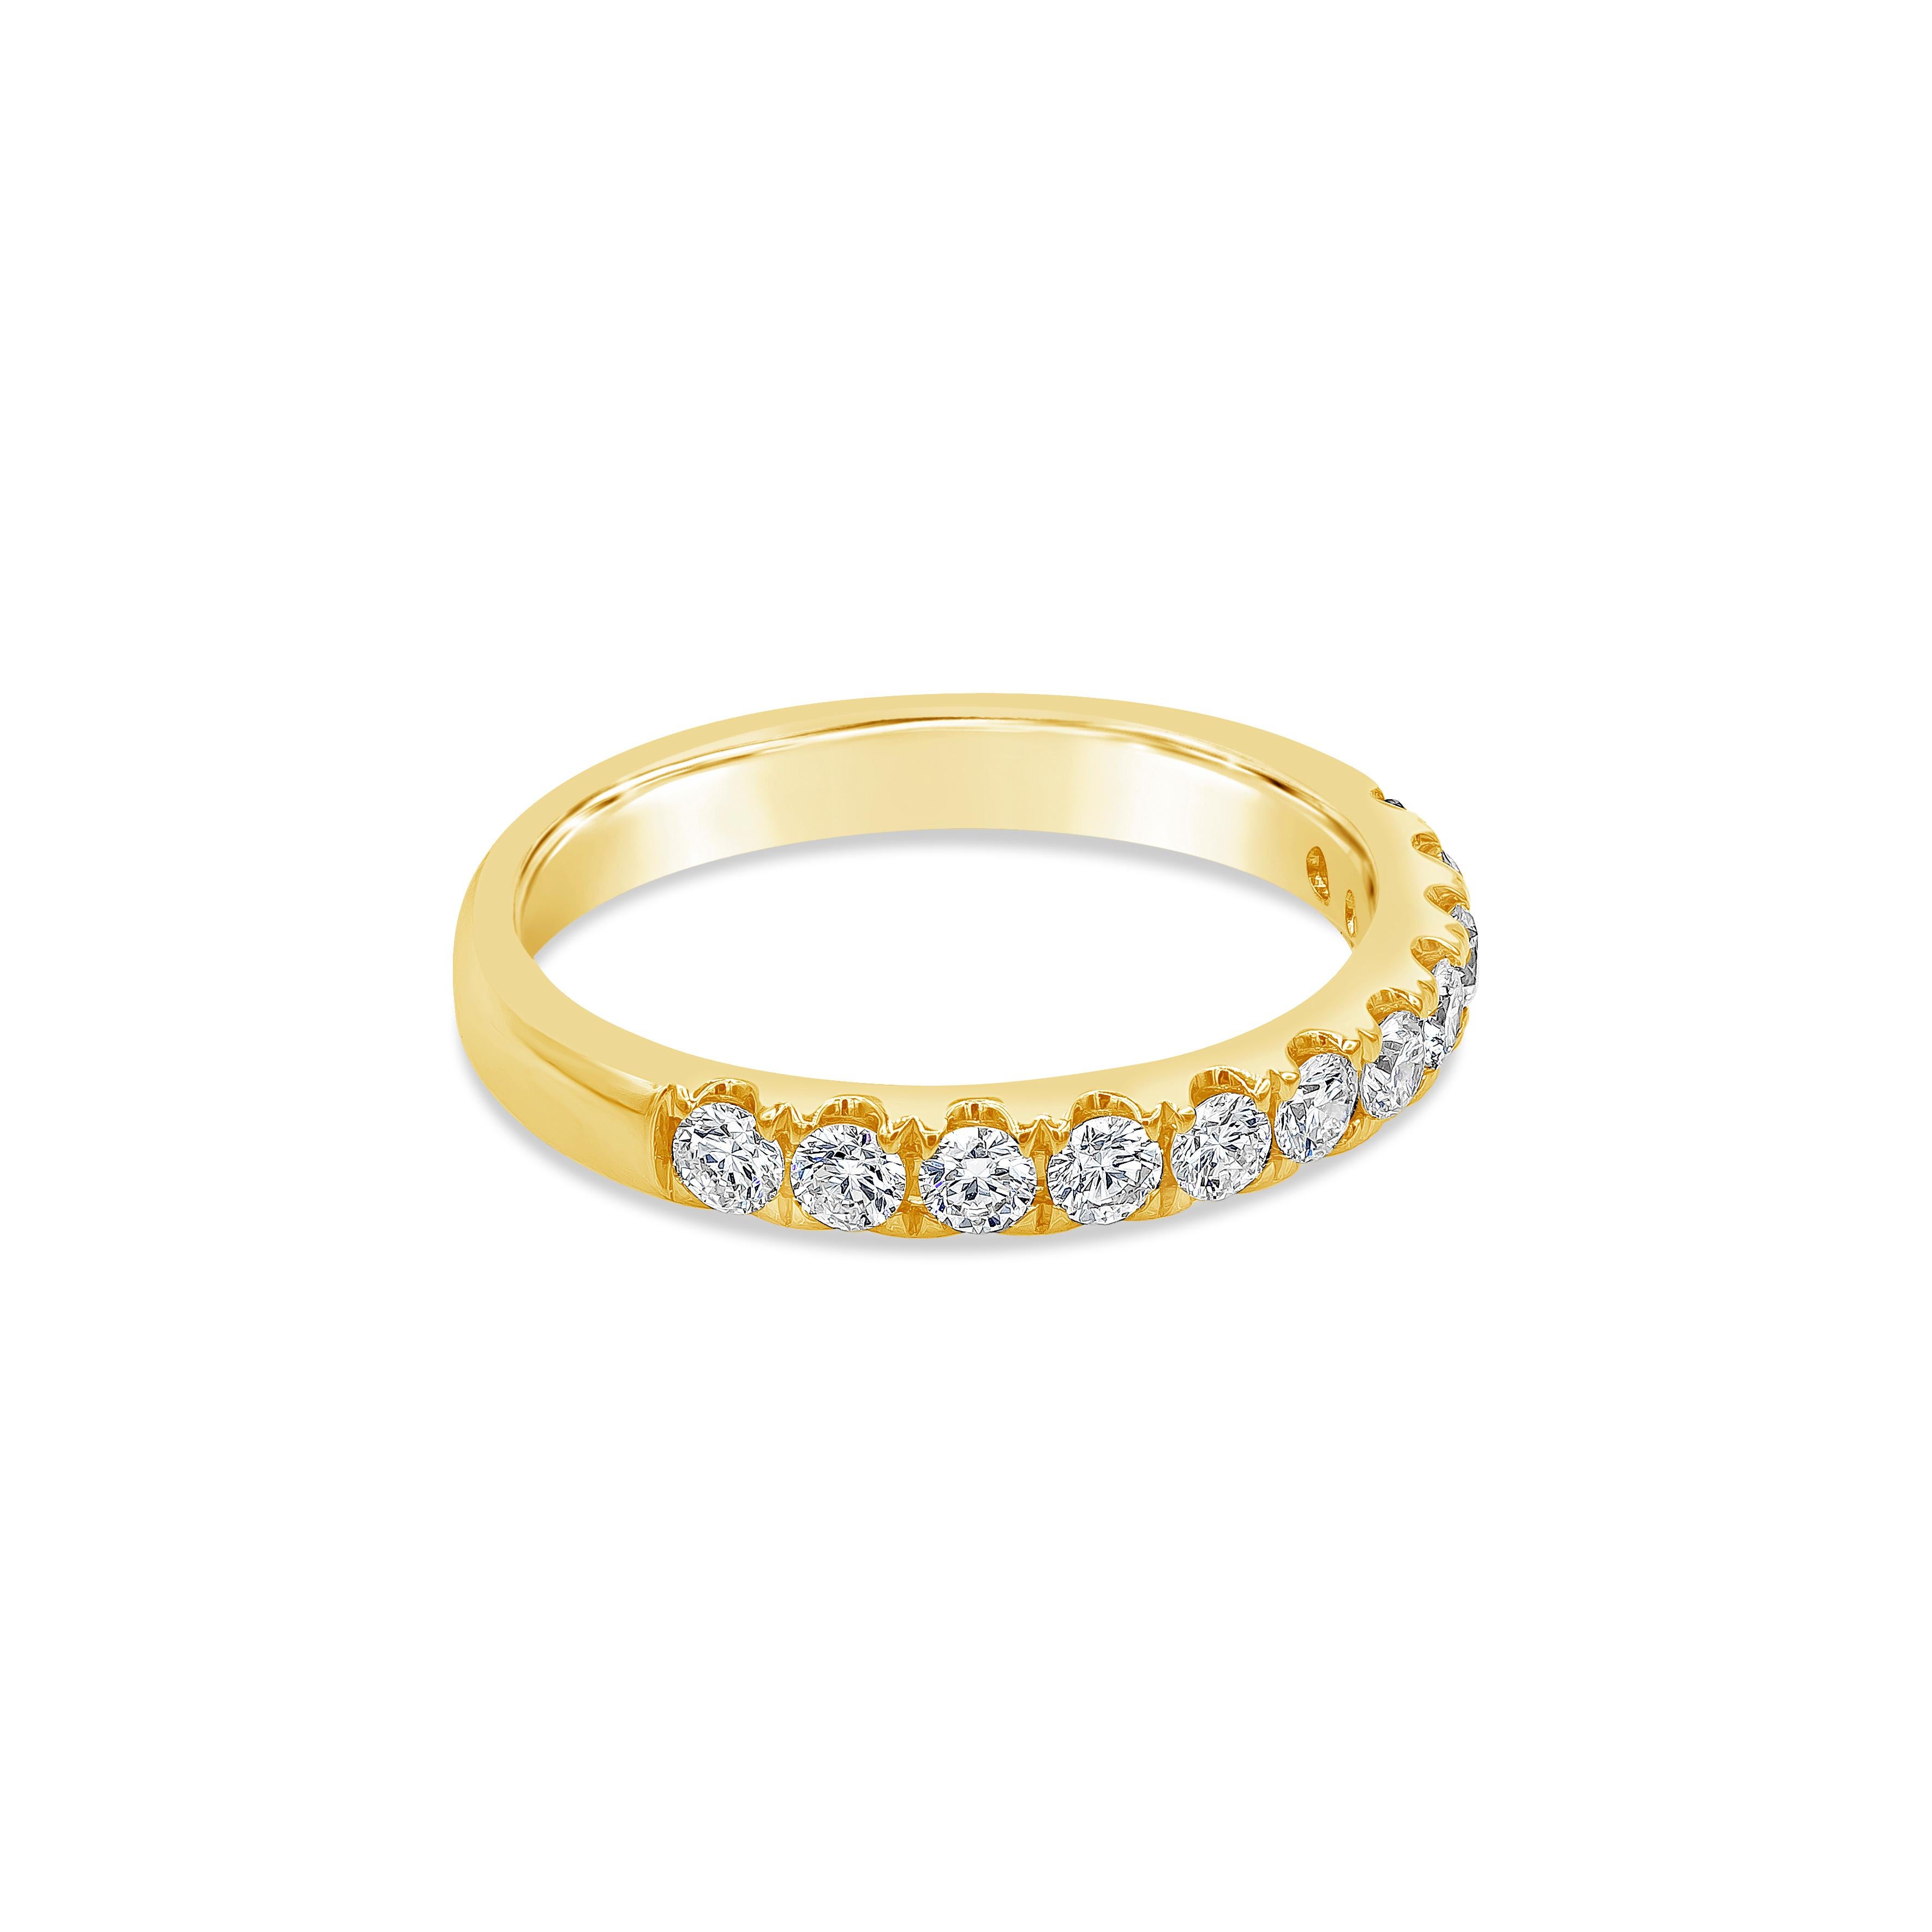 A classic eternity band style showcasing a row of round brilliant diamonds weighing 0.56 carats. Mounted half-way in micro-pave setting, Made with 14K Yellow Gold. Size 6.5 US 

Style available in different price ranges. Prices are based on your